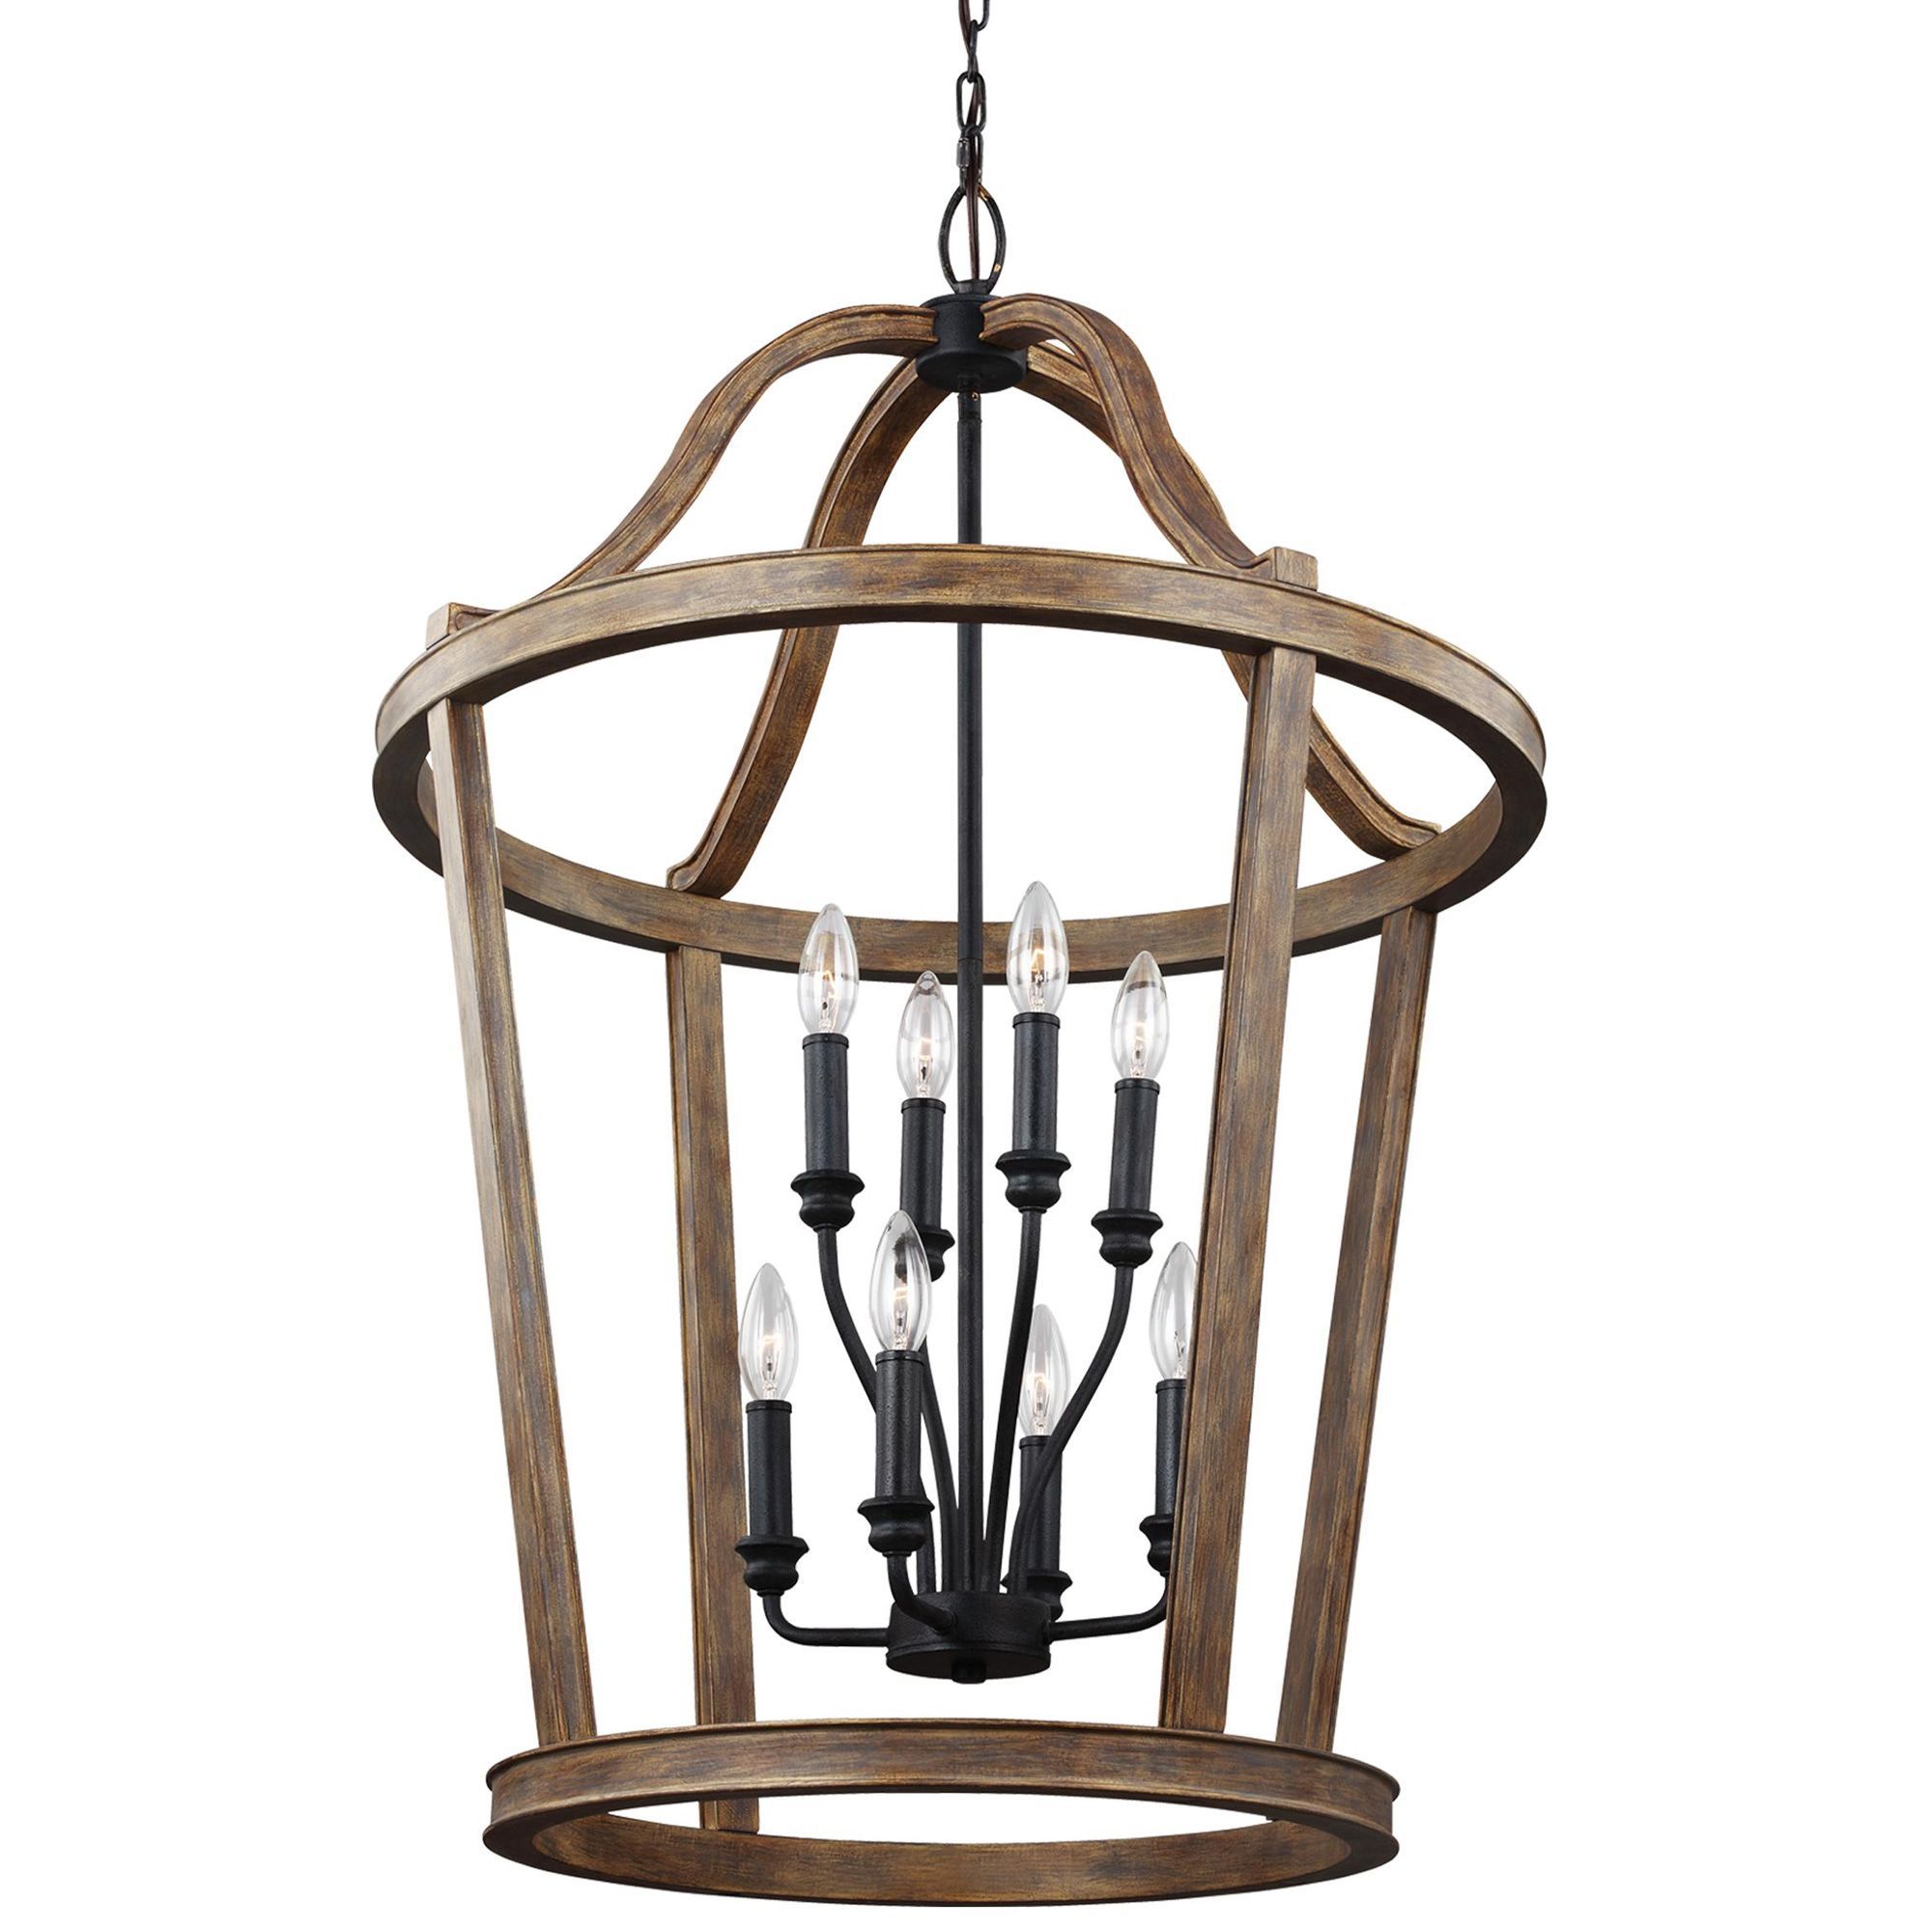 The Lorenz Chandelier Combines A Period Inspired Weathered Oak Wooden  Lantern With Dark Weathered Zinc H… | Wood Chandelier, Lantern Pendant  Lighting, Weathered Oak Inside Weathered Oak Wood Lantern Chandeliers (View 6 of 15)